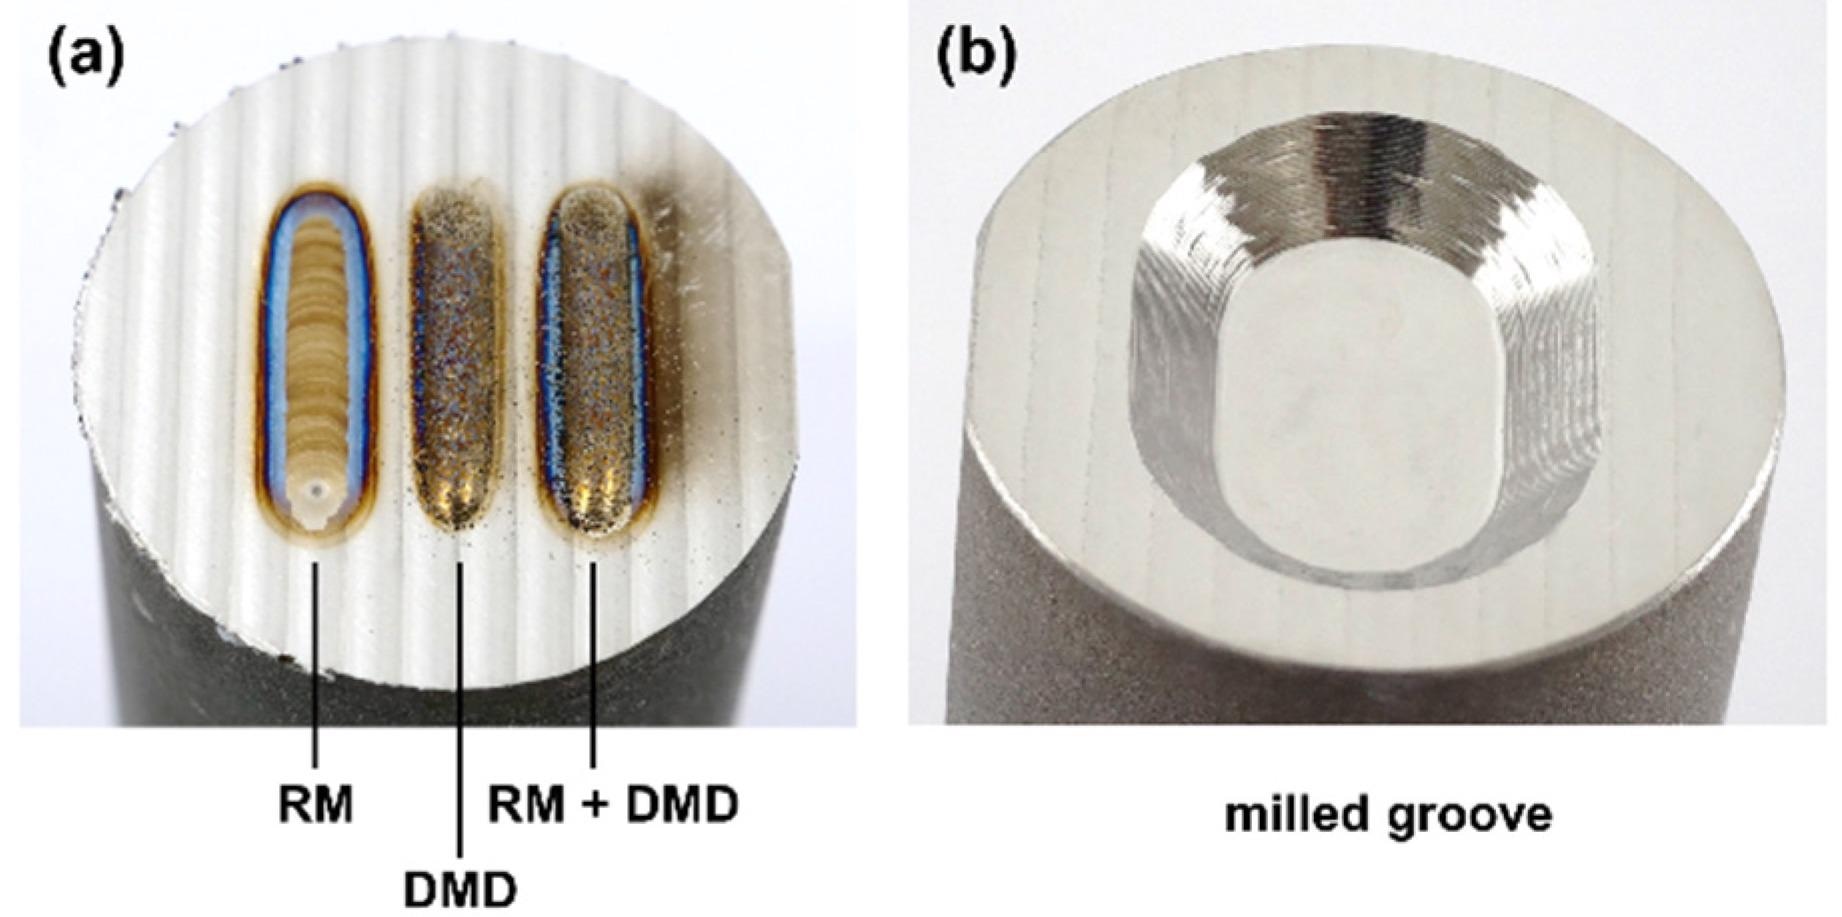 (a) Single tracks deposited in face-milled substrates and (b) groove geometry after machining